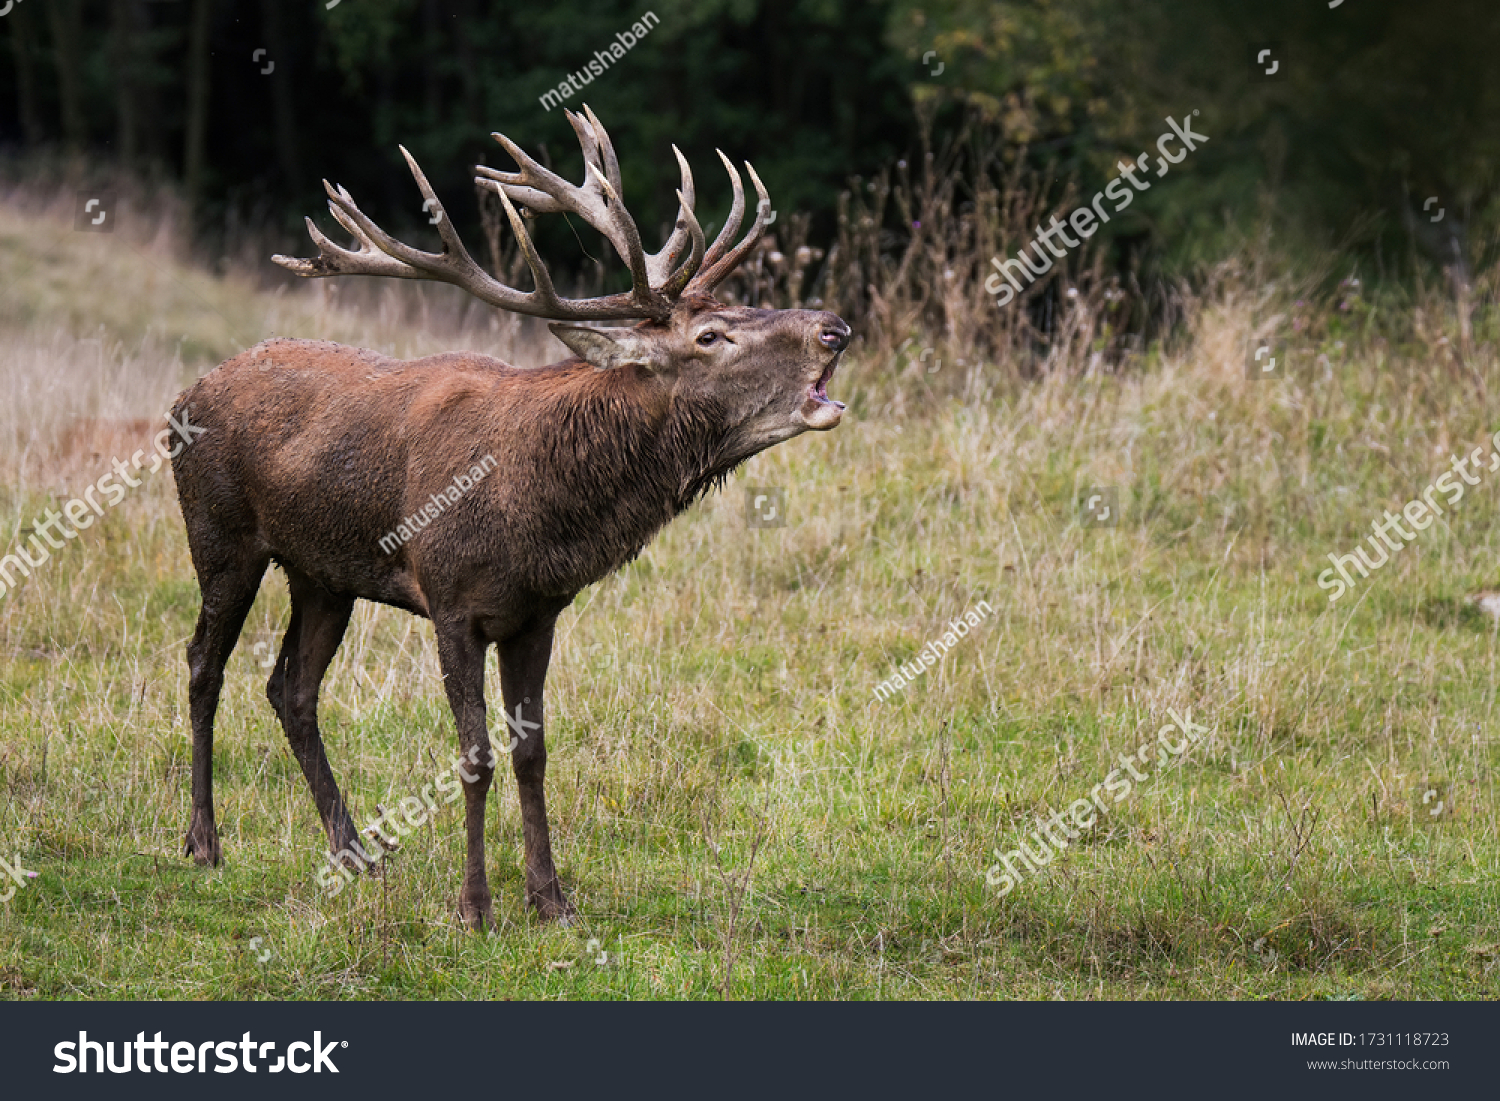 Red deer (Cervus elaphus), massive male during the rutting season, with huge antlers, dirty fluffy fur, in his natural forest habitat, Slovakia. #1731118723